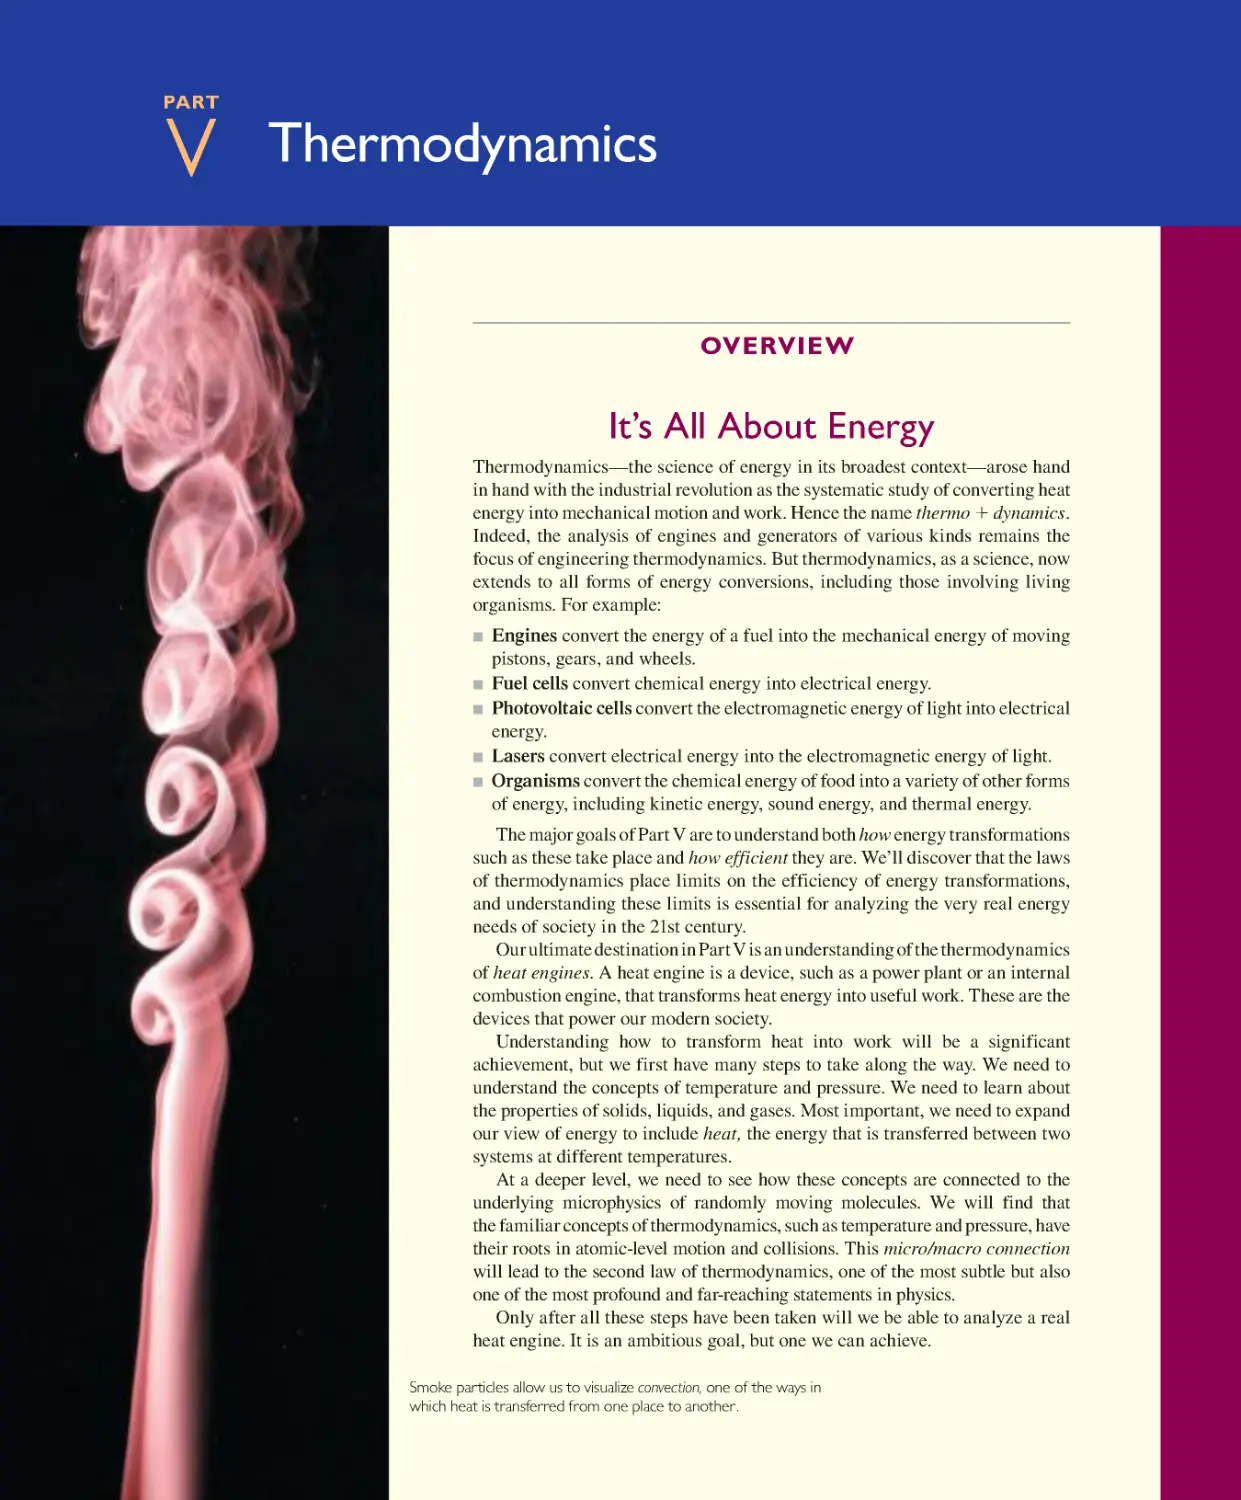 Part V: Thermodynamics: Overview: It’s All About Energy